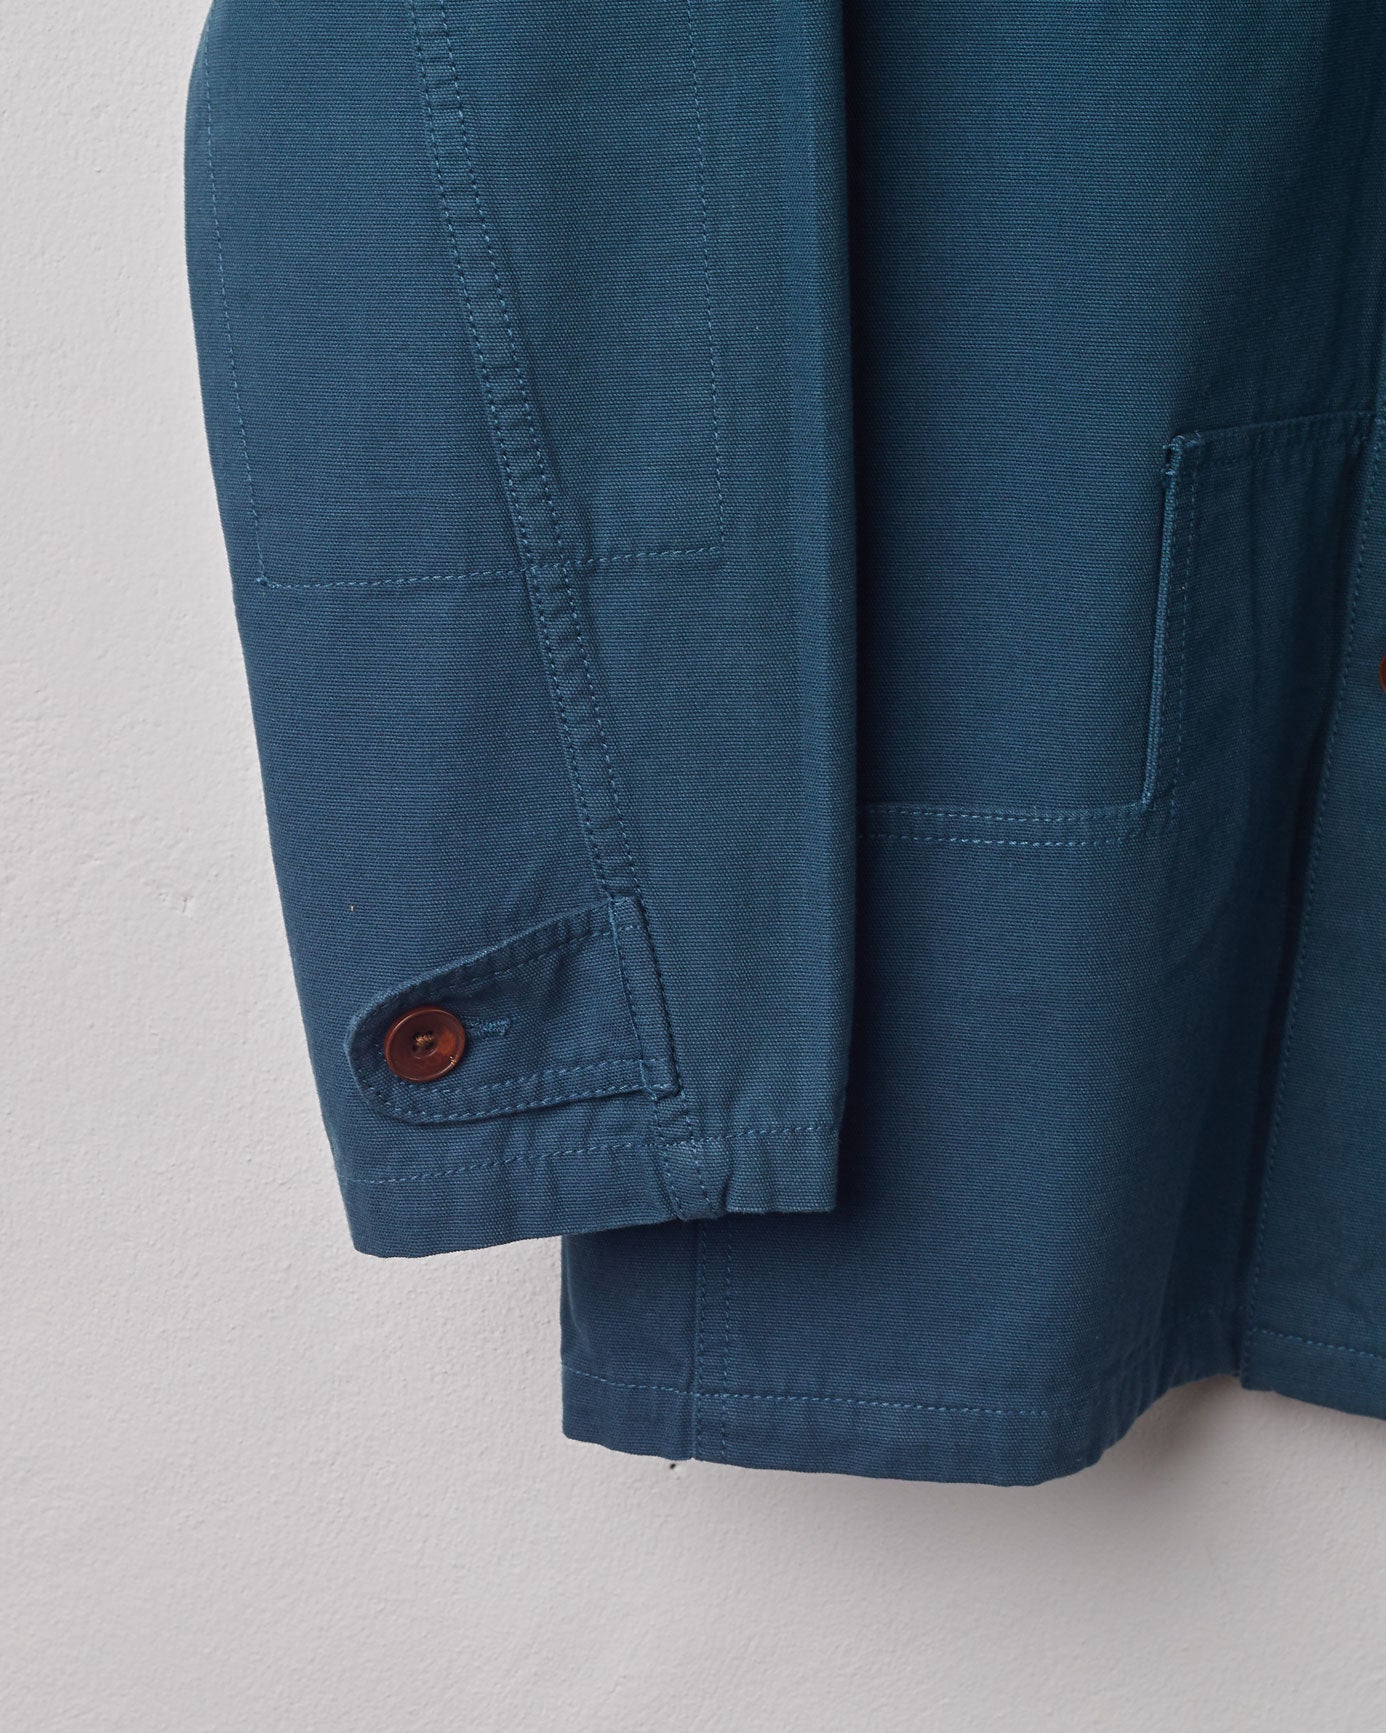 Close-up of #3004 Uskees peacock coloured button jacket showing cuff detail with brown Corozo button